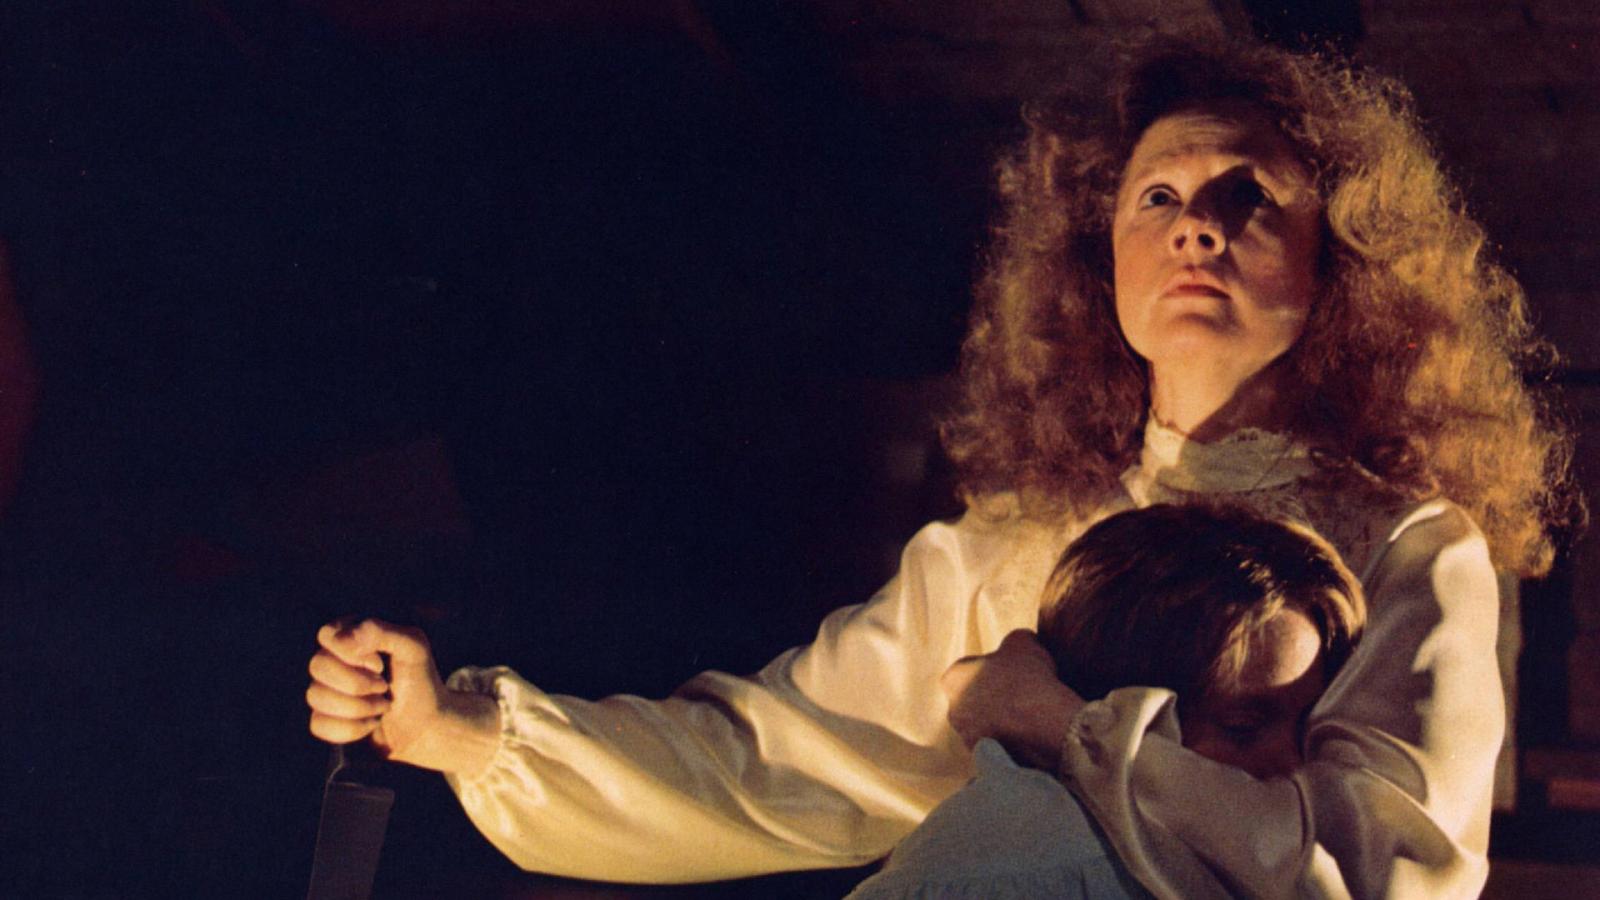 Tarantino's List of 10 Must-Watch Horror Films: Did Your Favorites Make the Cut? - image 9